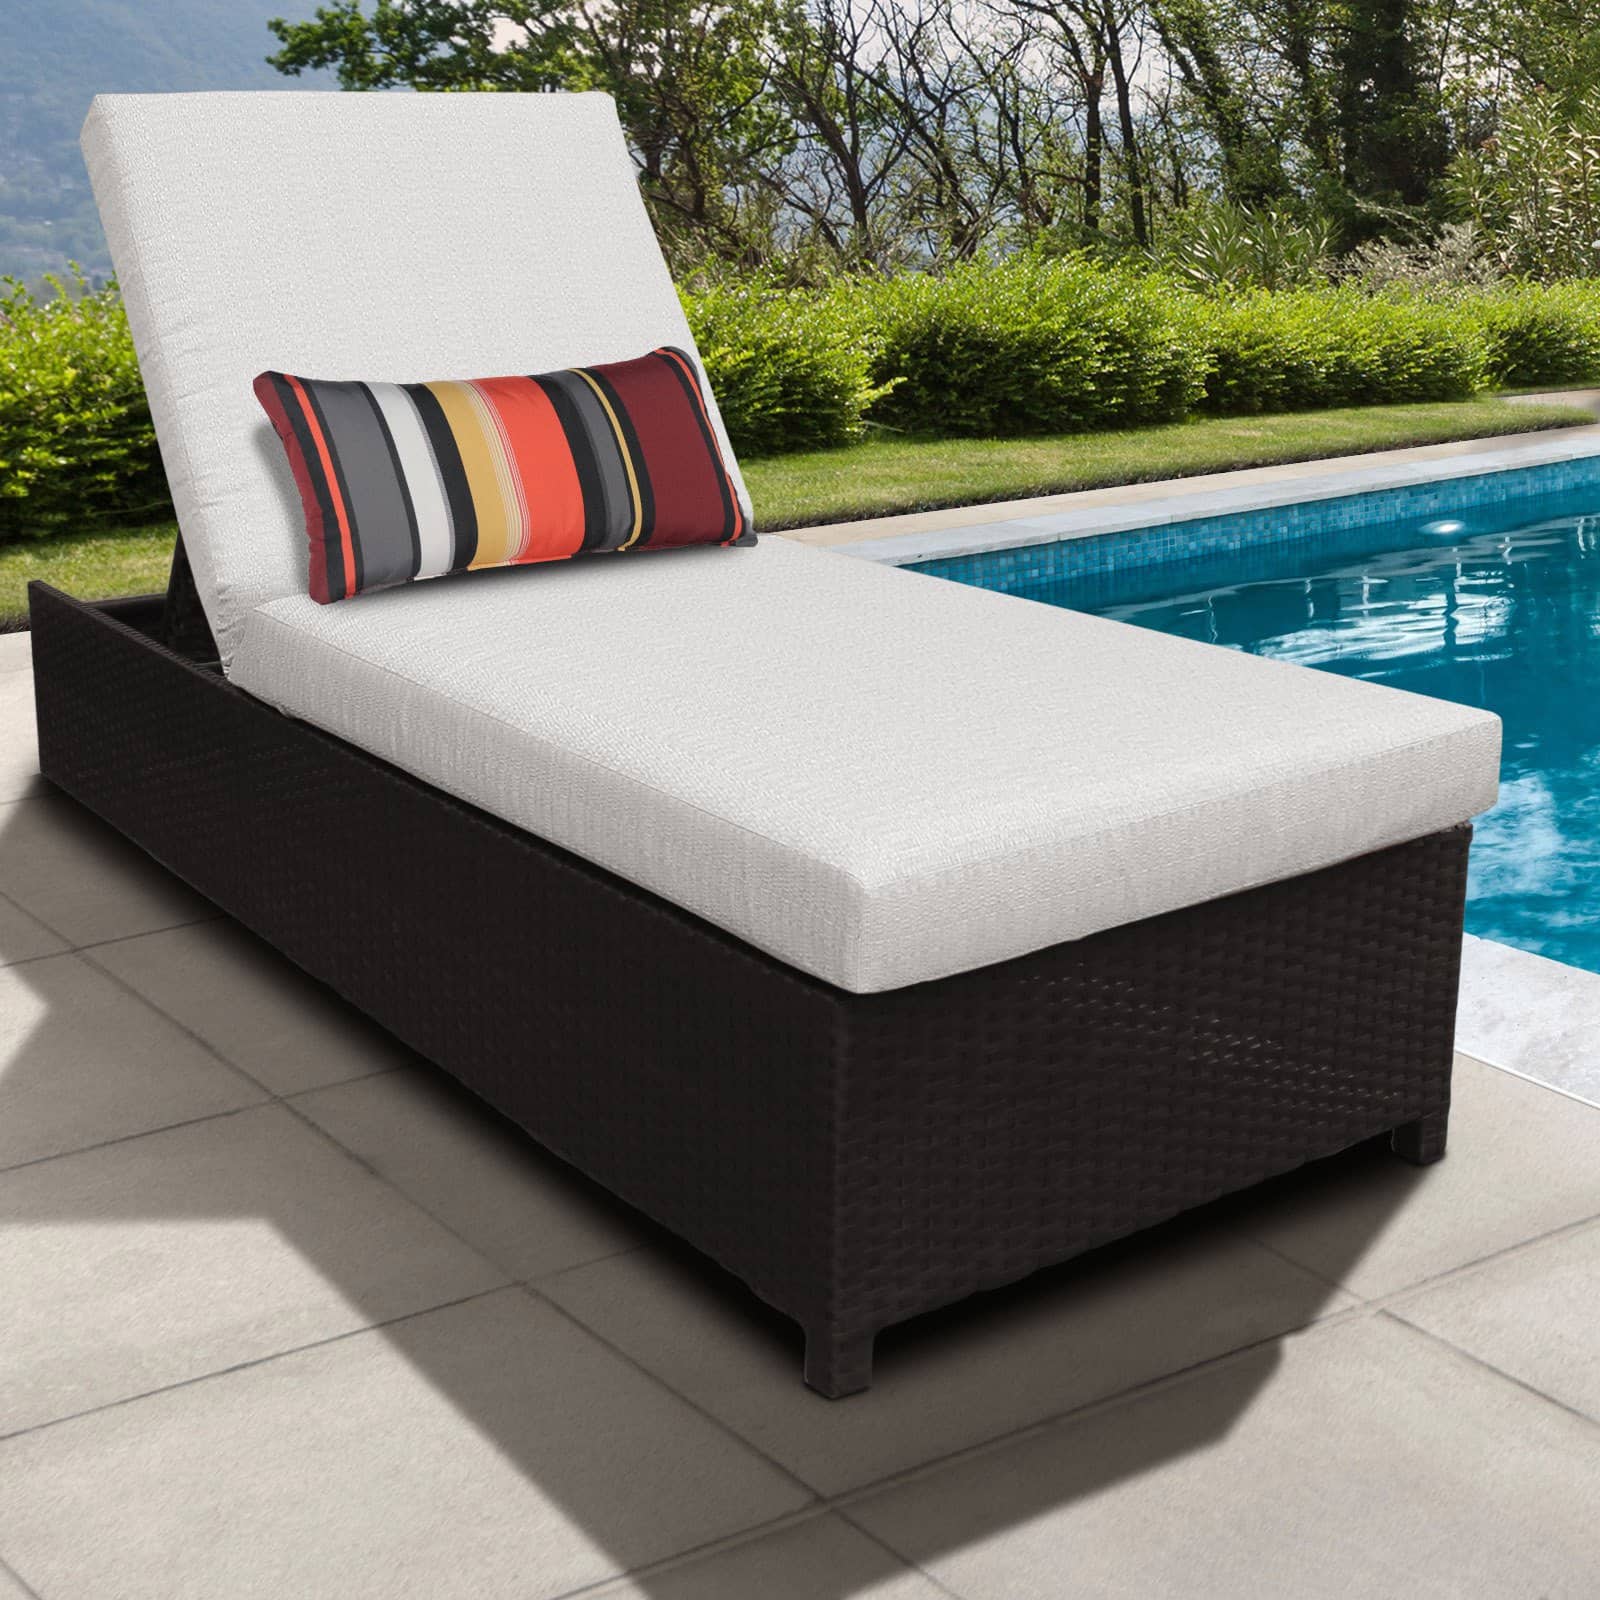 TK Classics Belle Wheeled Wicker Outdoor Chaise Lounge Chair - image 5 of 11